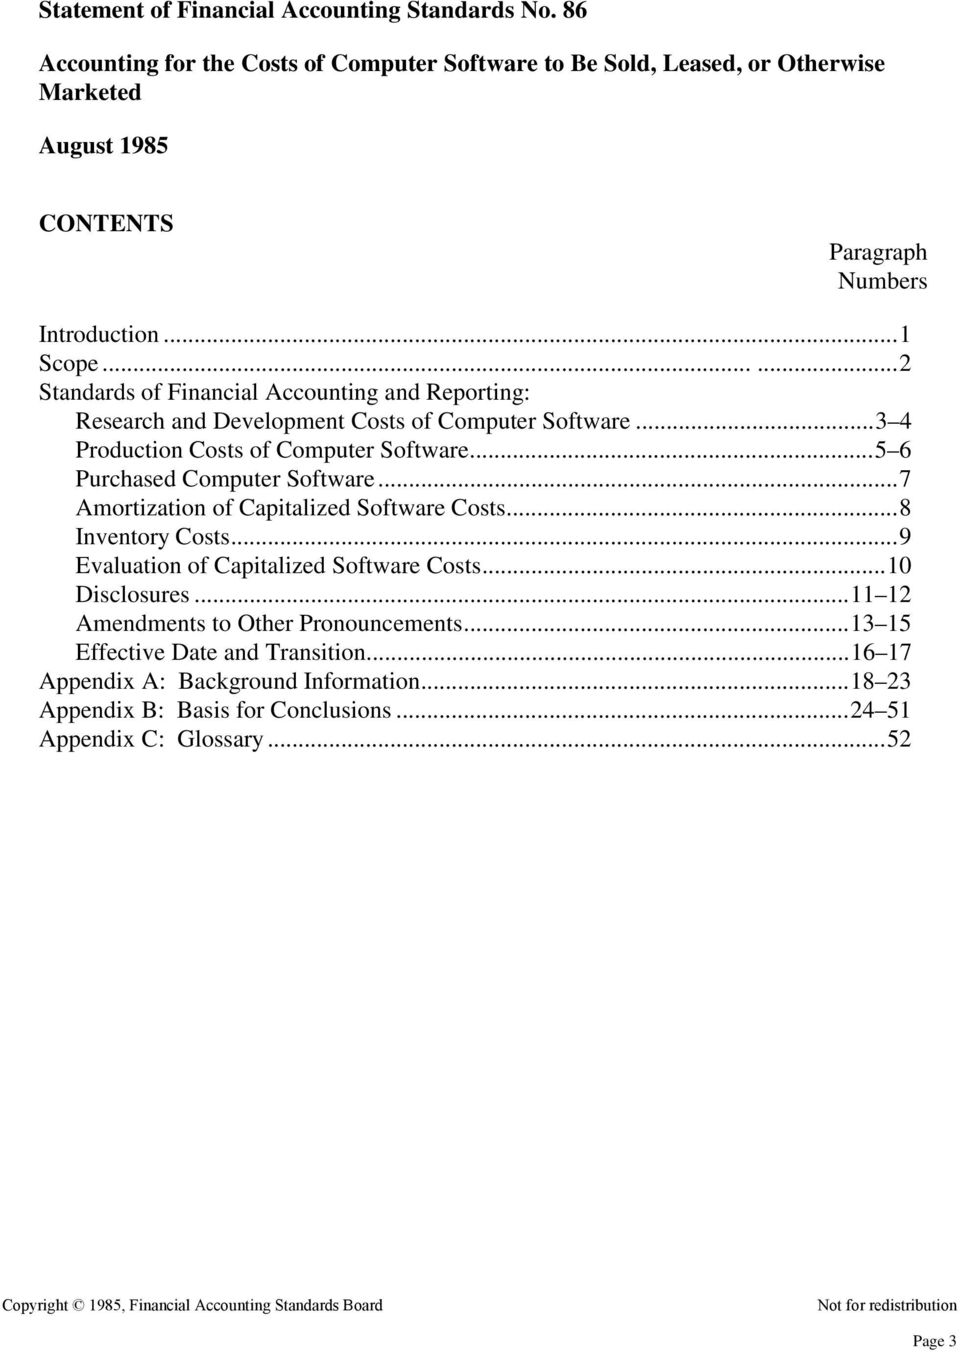 .....2 Standards of Financial Accounting and Reporting: Research and Development Costs of Computer Software...3 4 Production Costs of Computer Software.